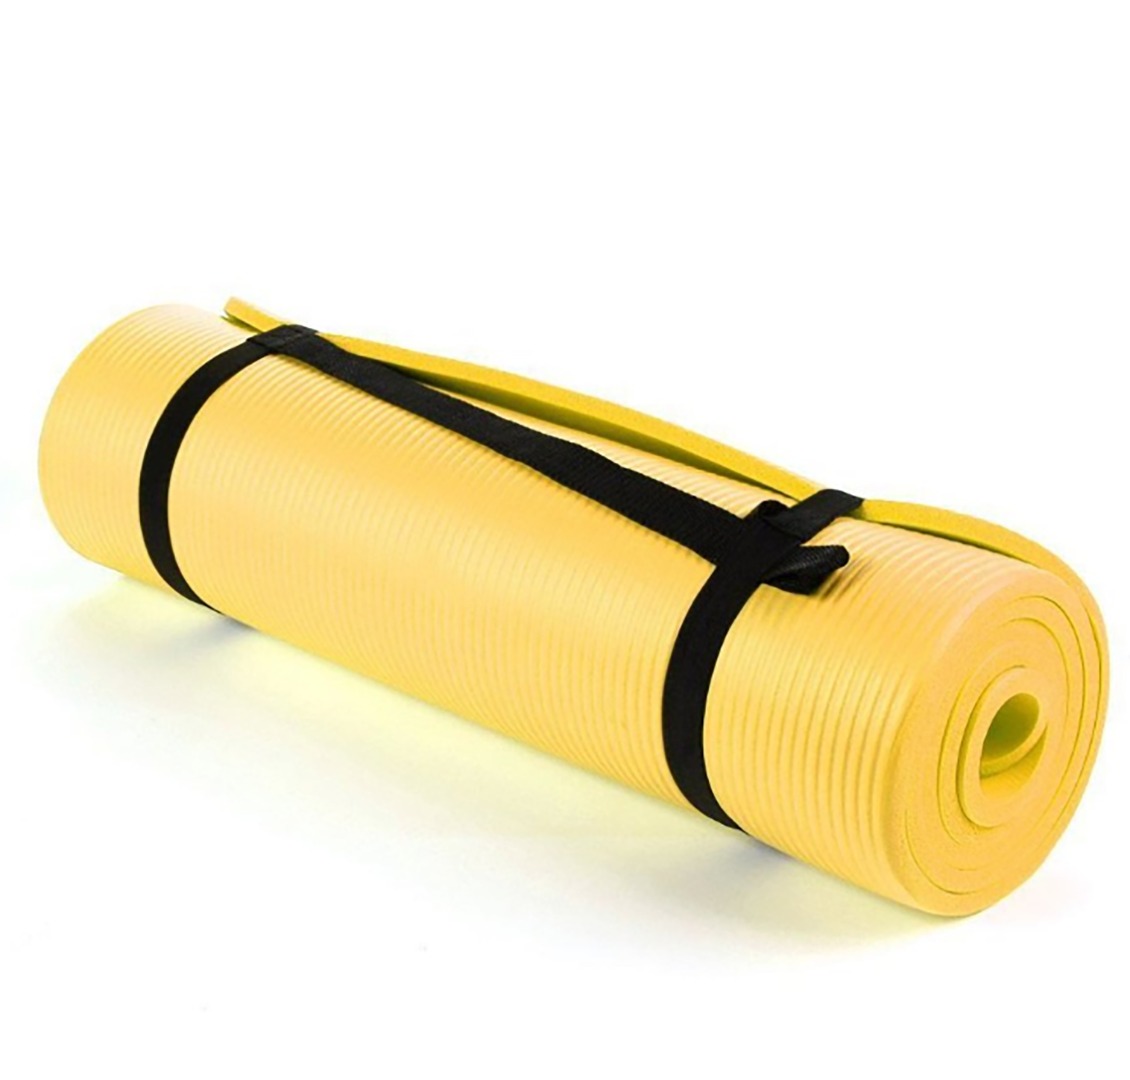 NBR Yellow 15mm Thick Exercise Fitness Gym Yoga Mat 190cm x 60cm